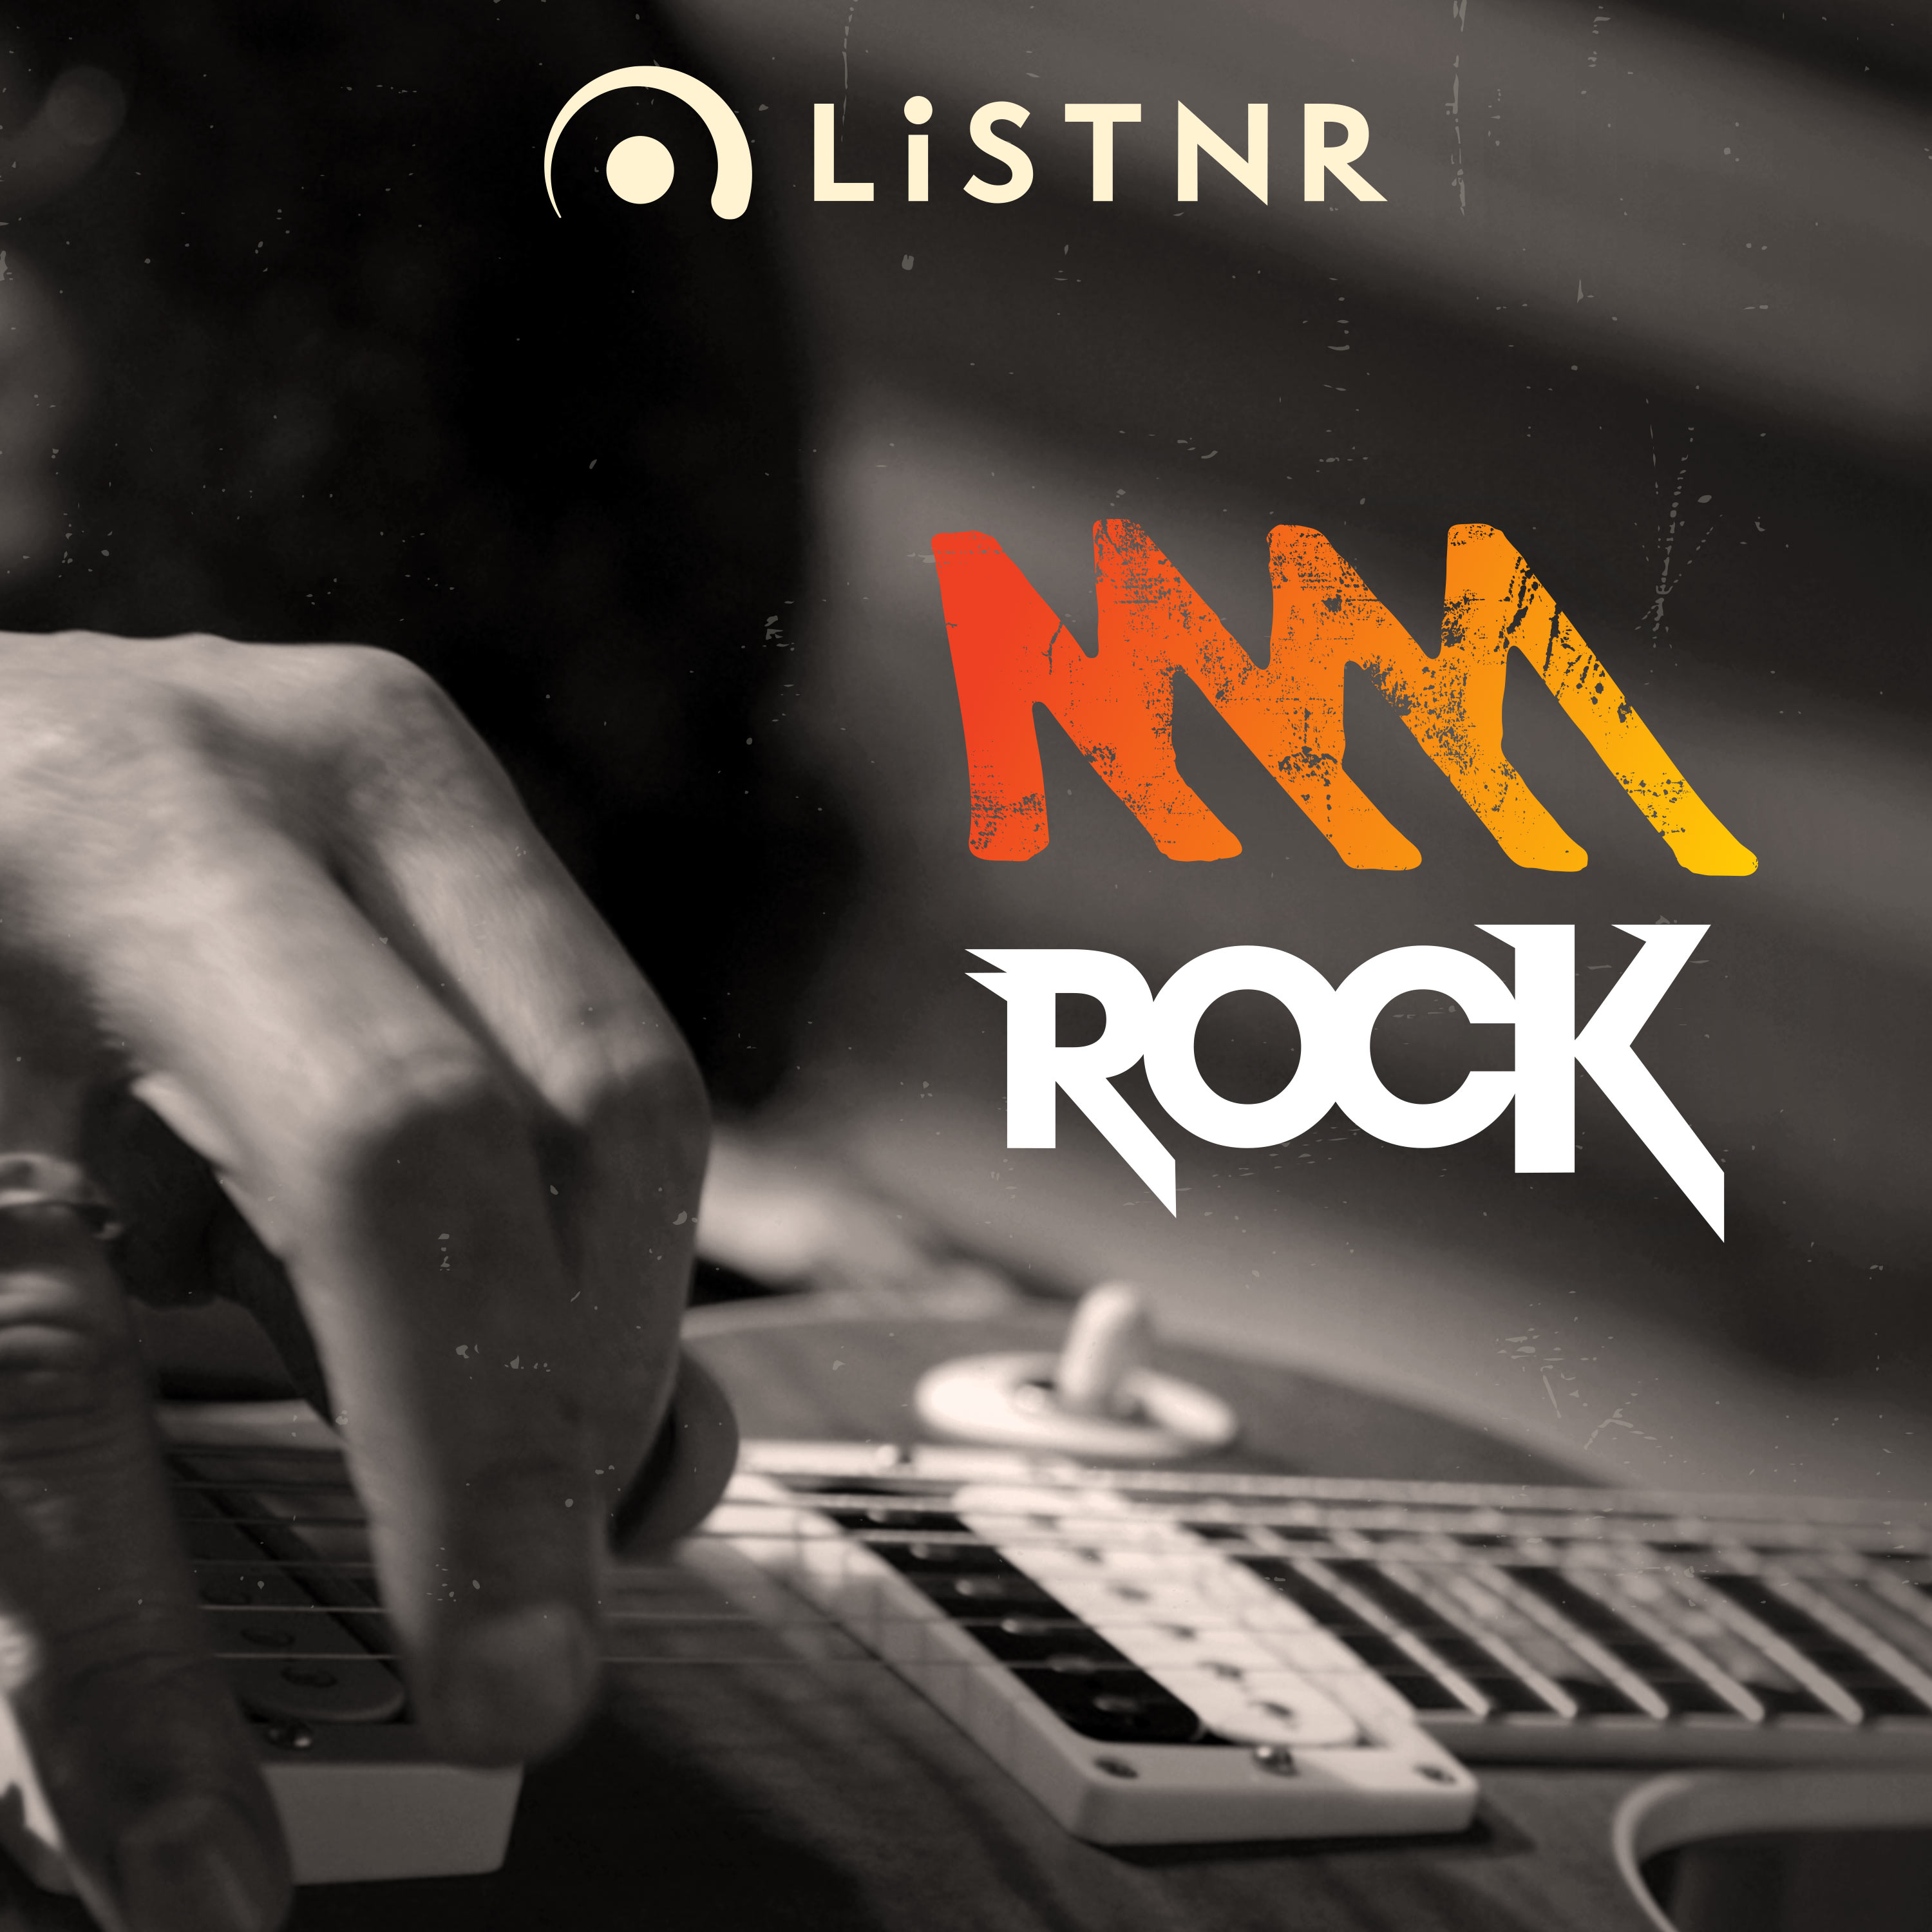 Tribute to Eddie Van Halen, Chris Cheney is back, live music is coming back and more, this is all that matters in Triple M Rock News this week.